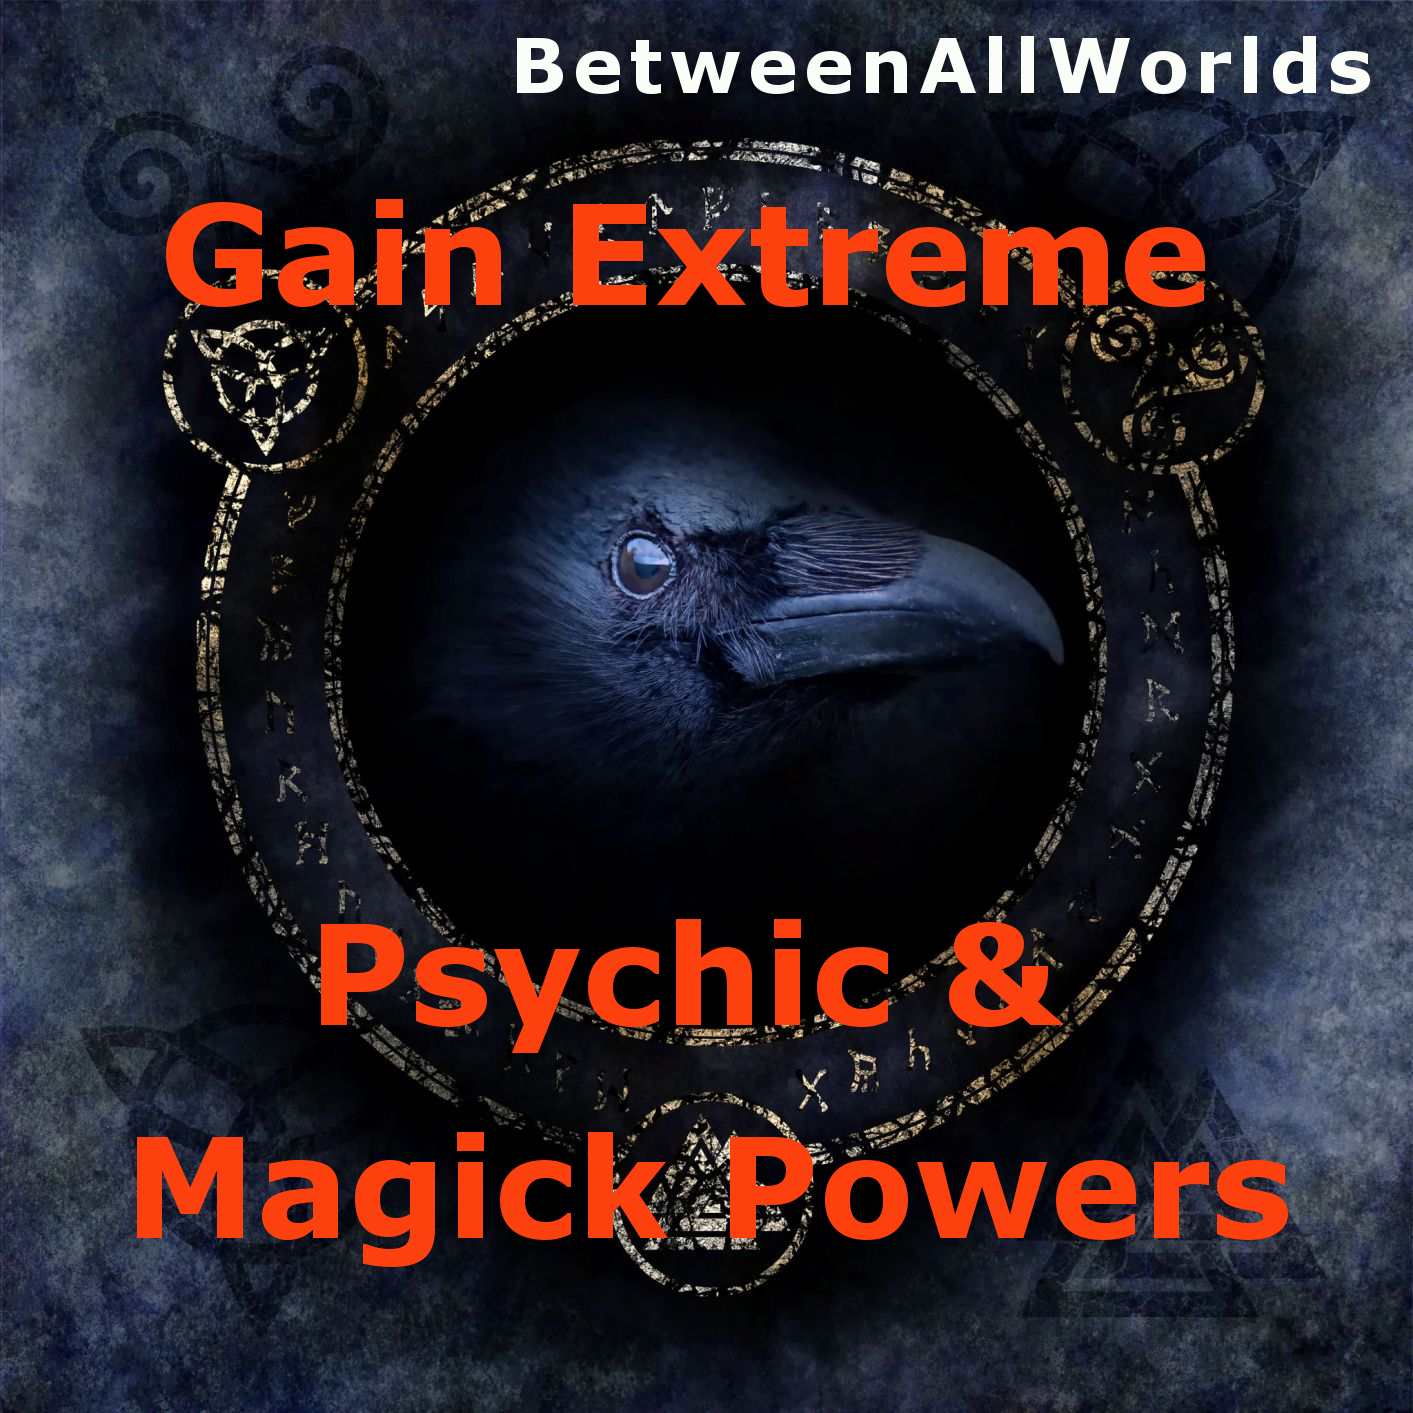 Primary image for Rare Raven Magick Gain Extreme Psychic + Magick 3rd Eye Powers Betweenallworlds